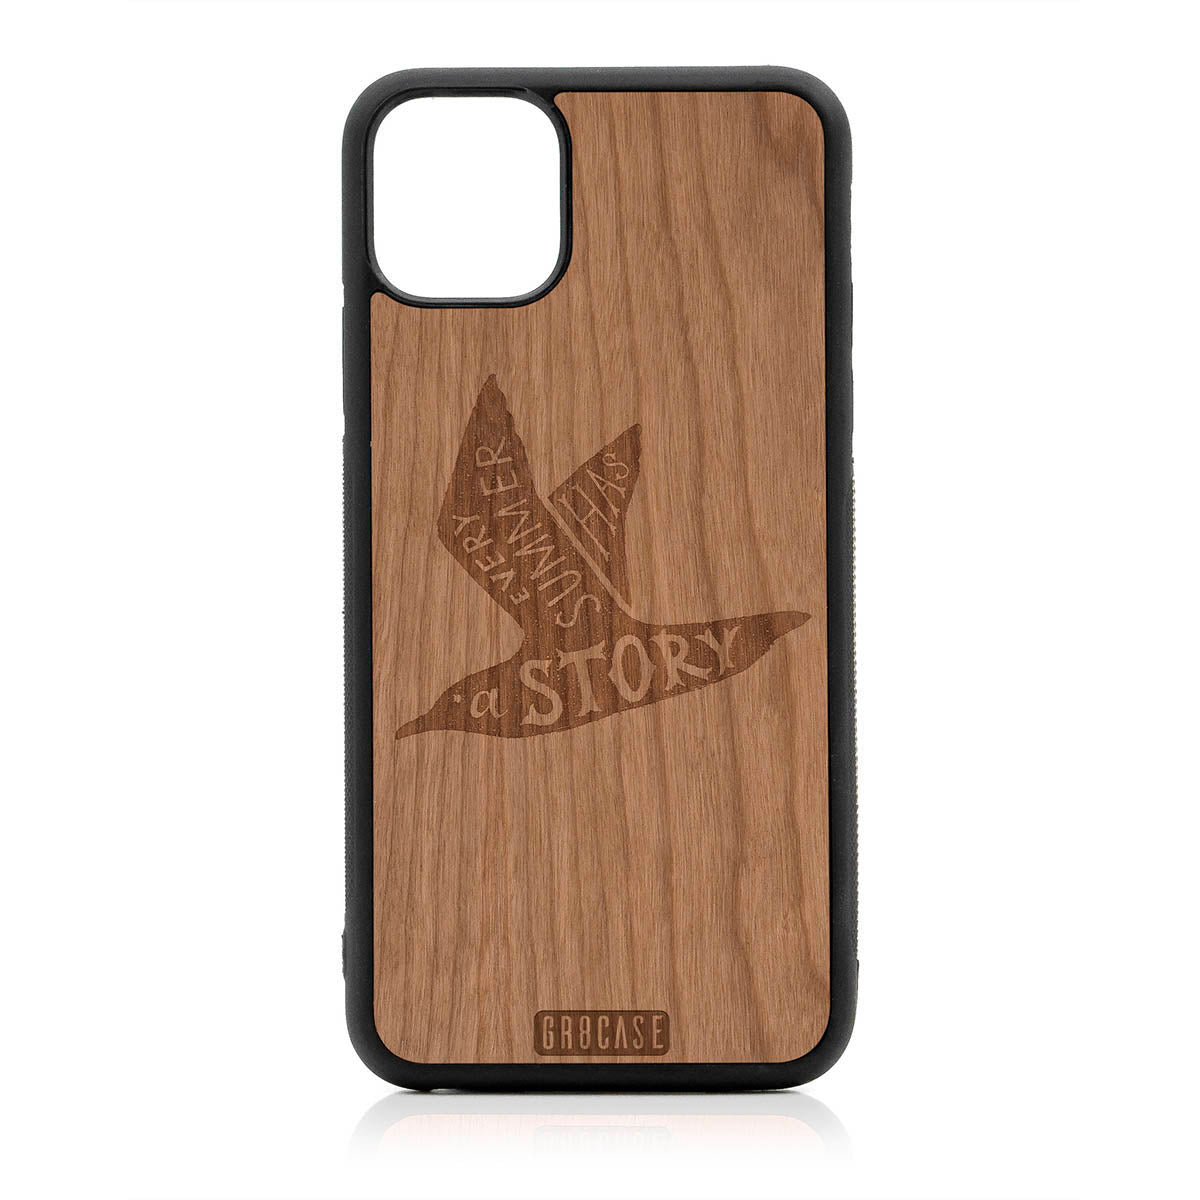 Every Summer Has A Story (Seagull) Design Wood Case For iPhone 11 Pro Max